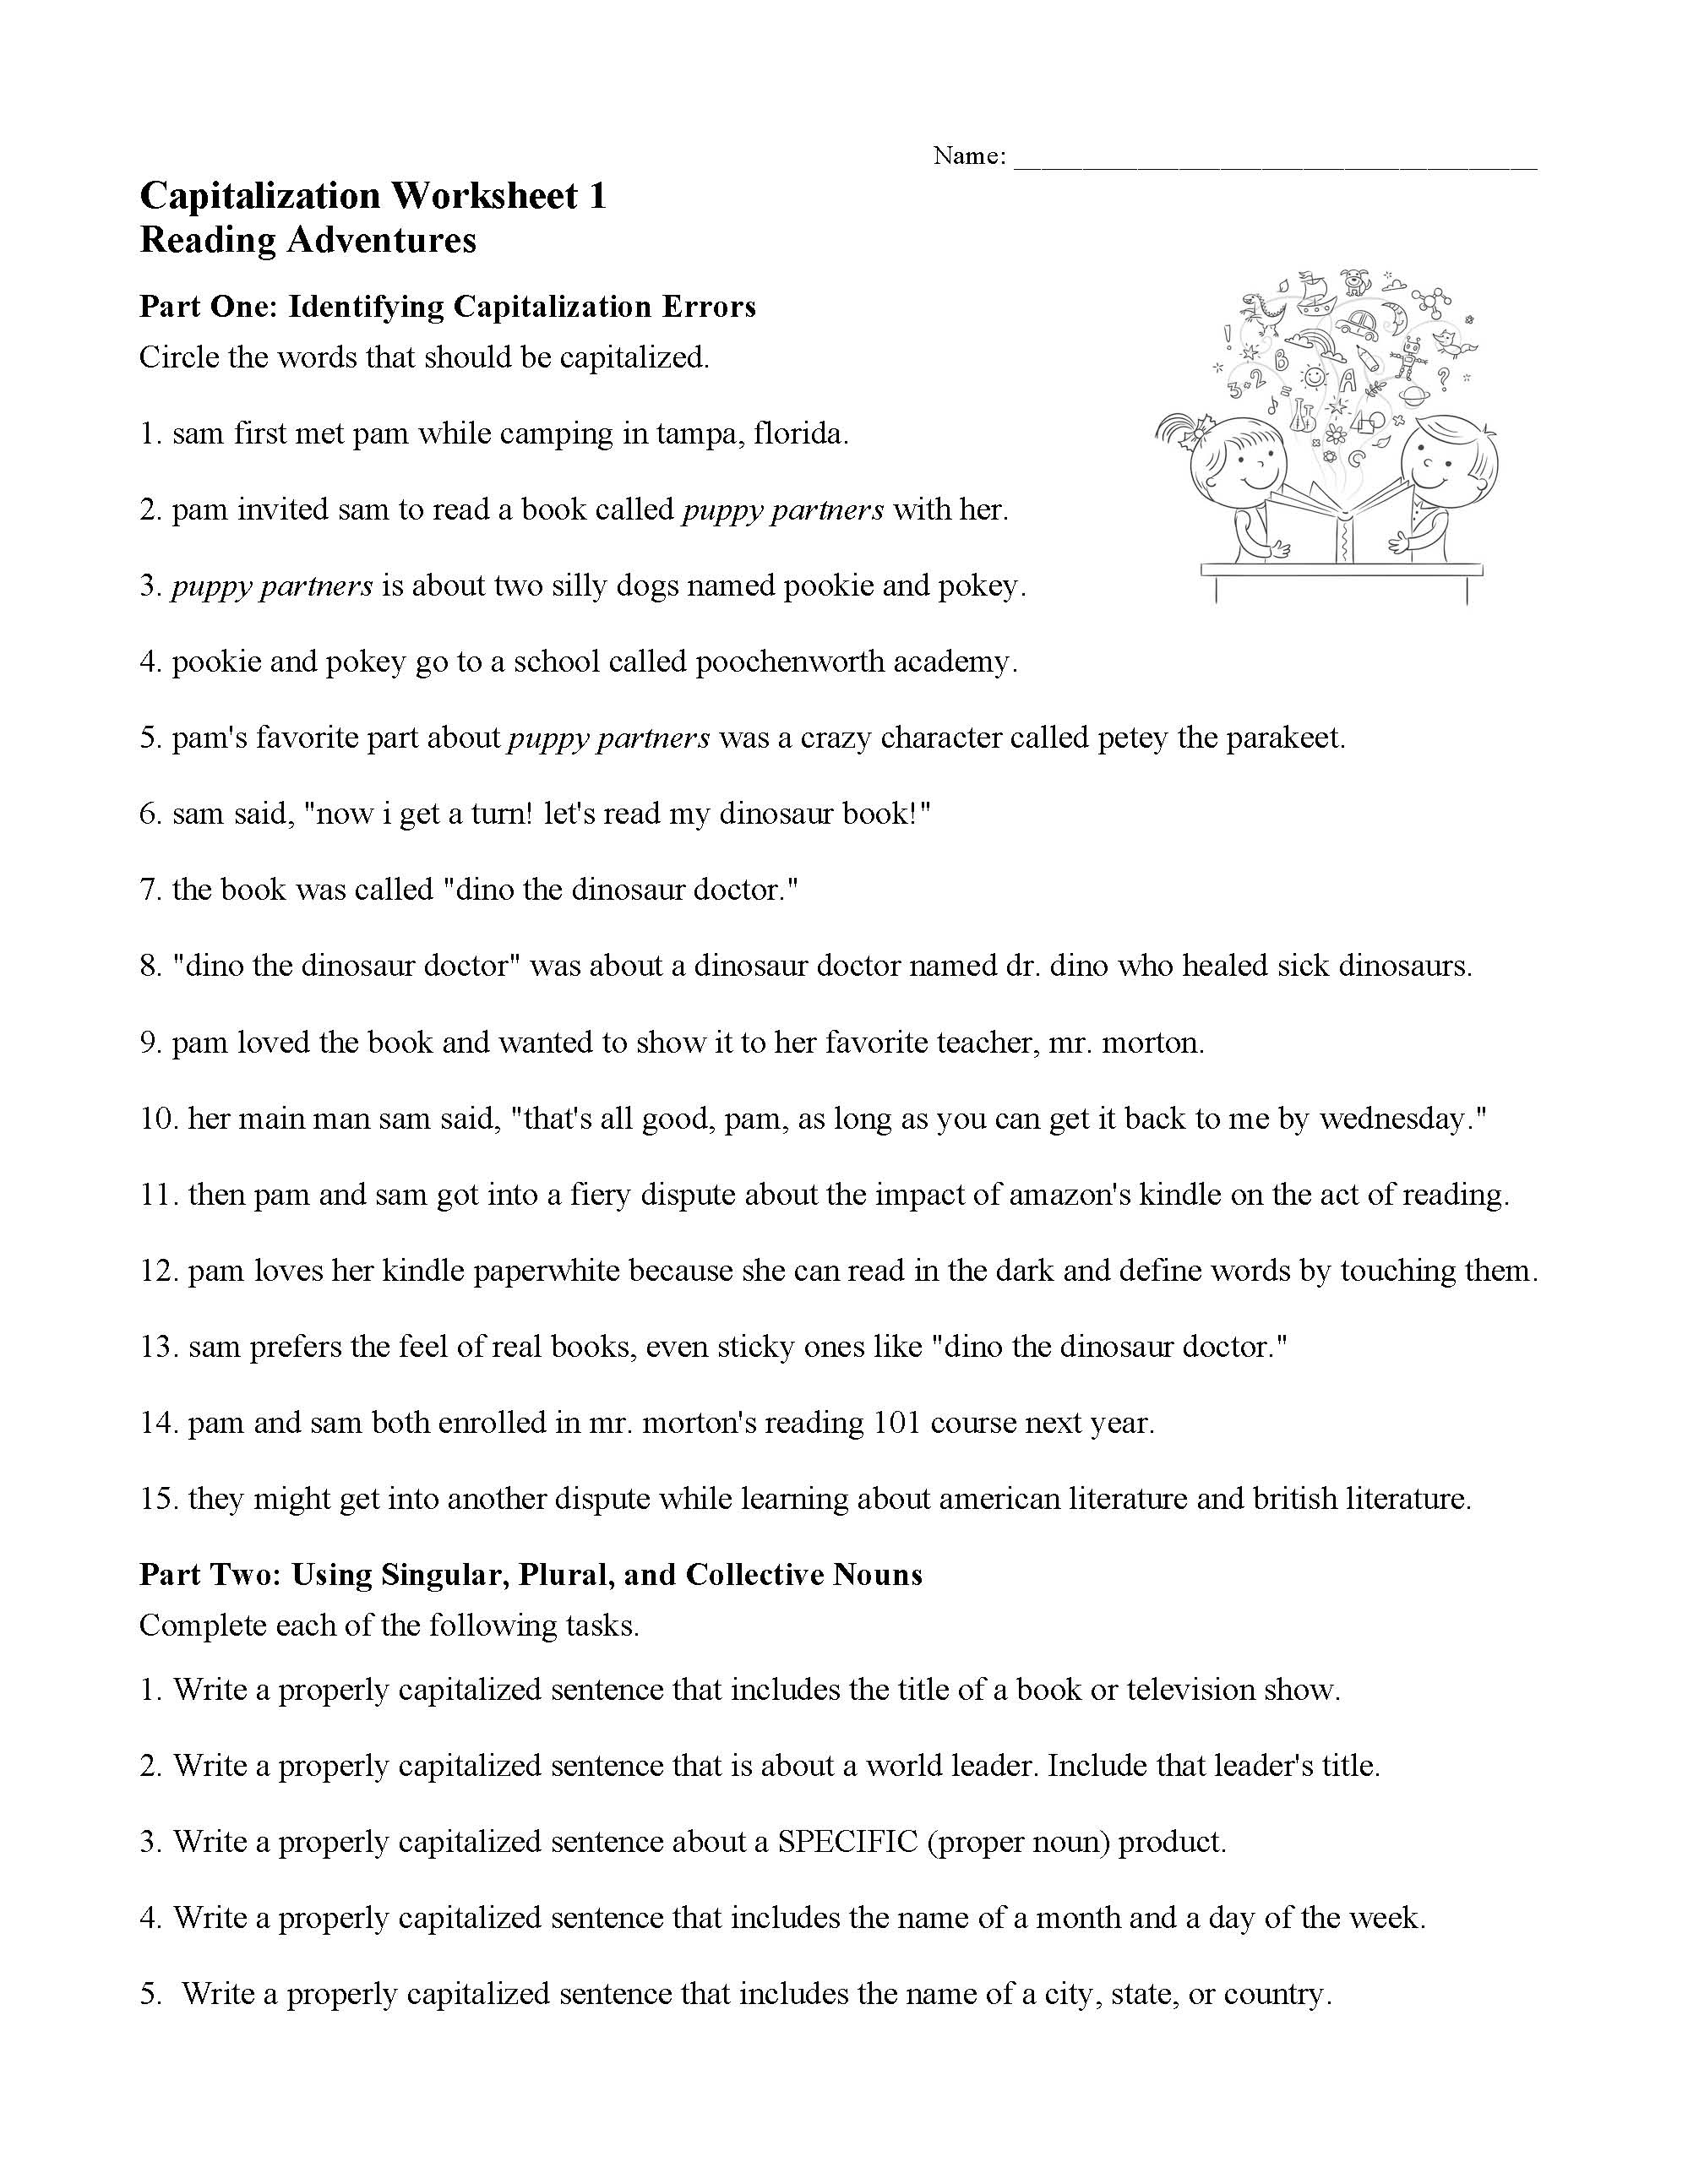 capitalization-worksheet-1-preview